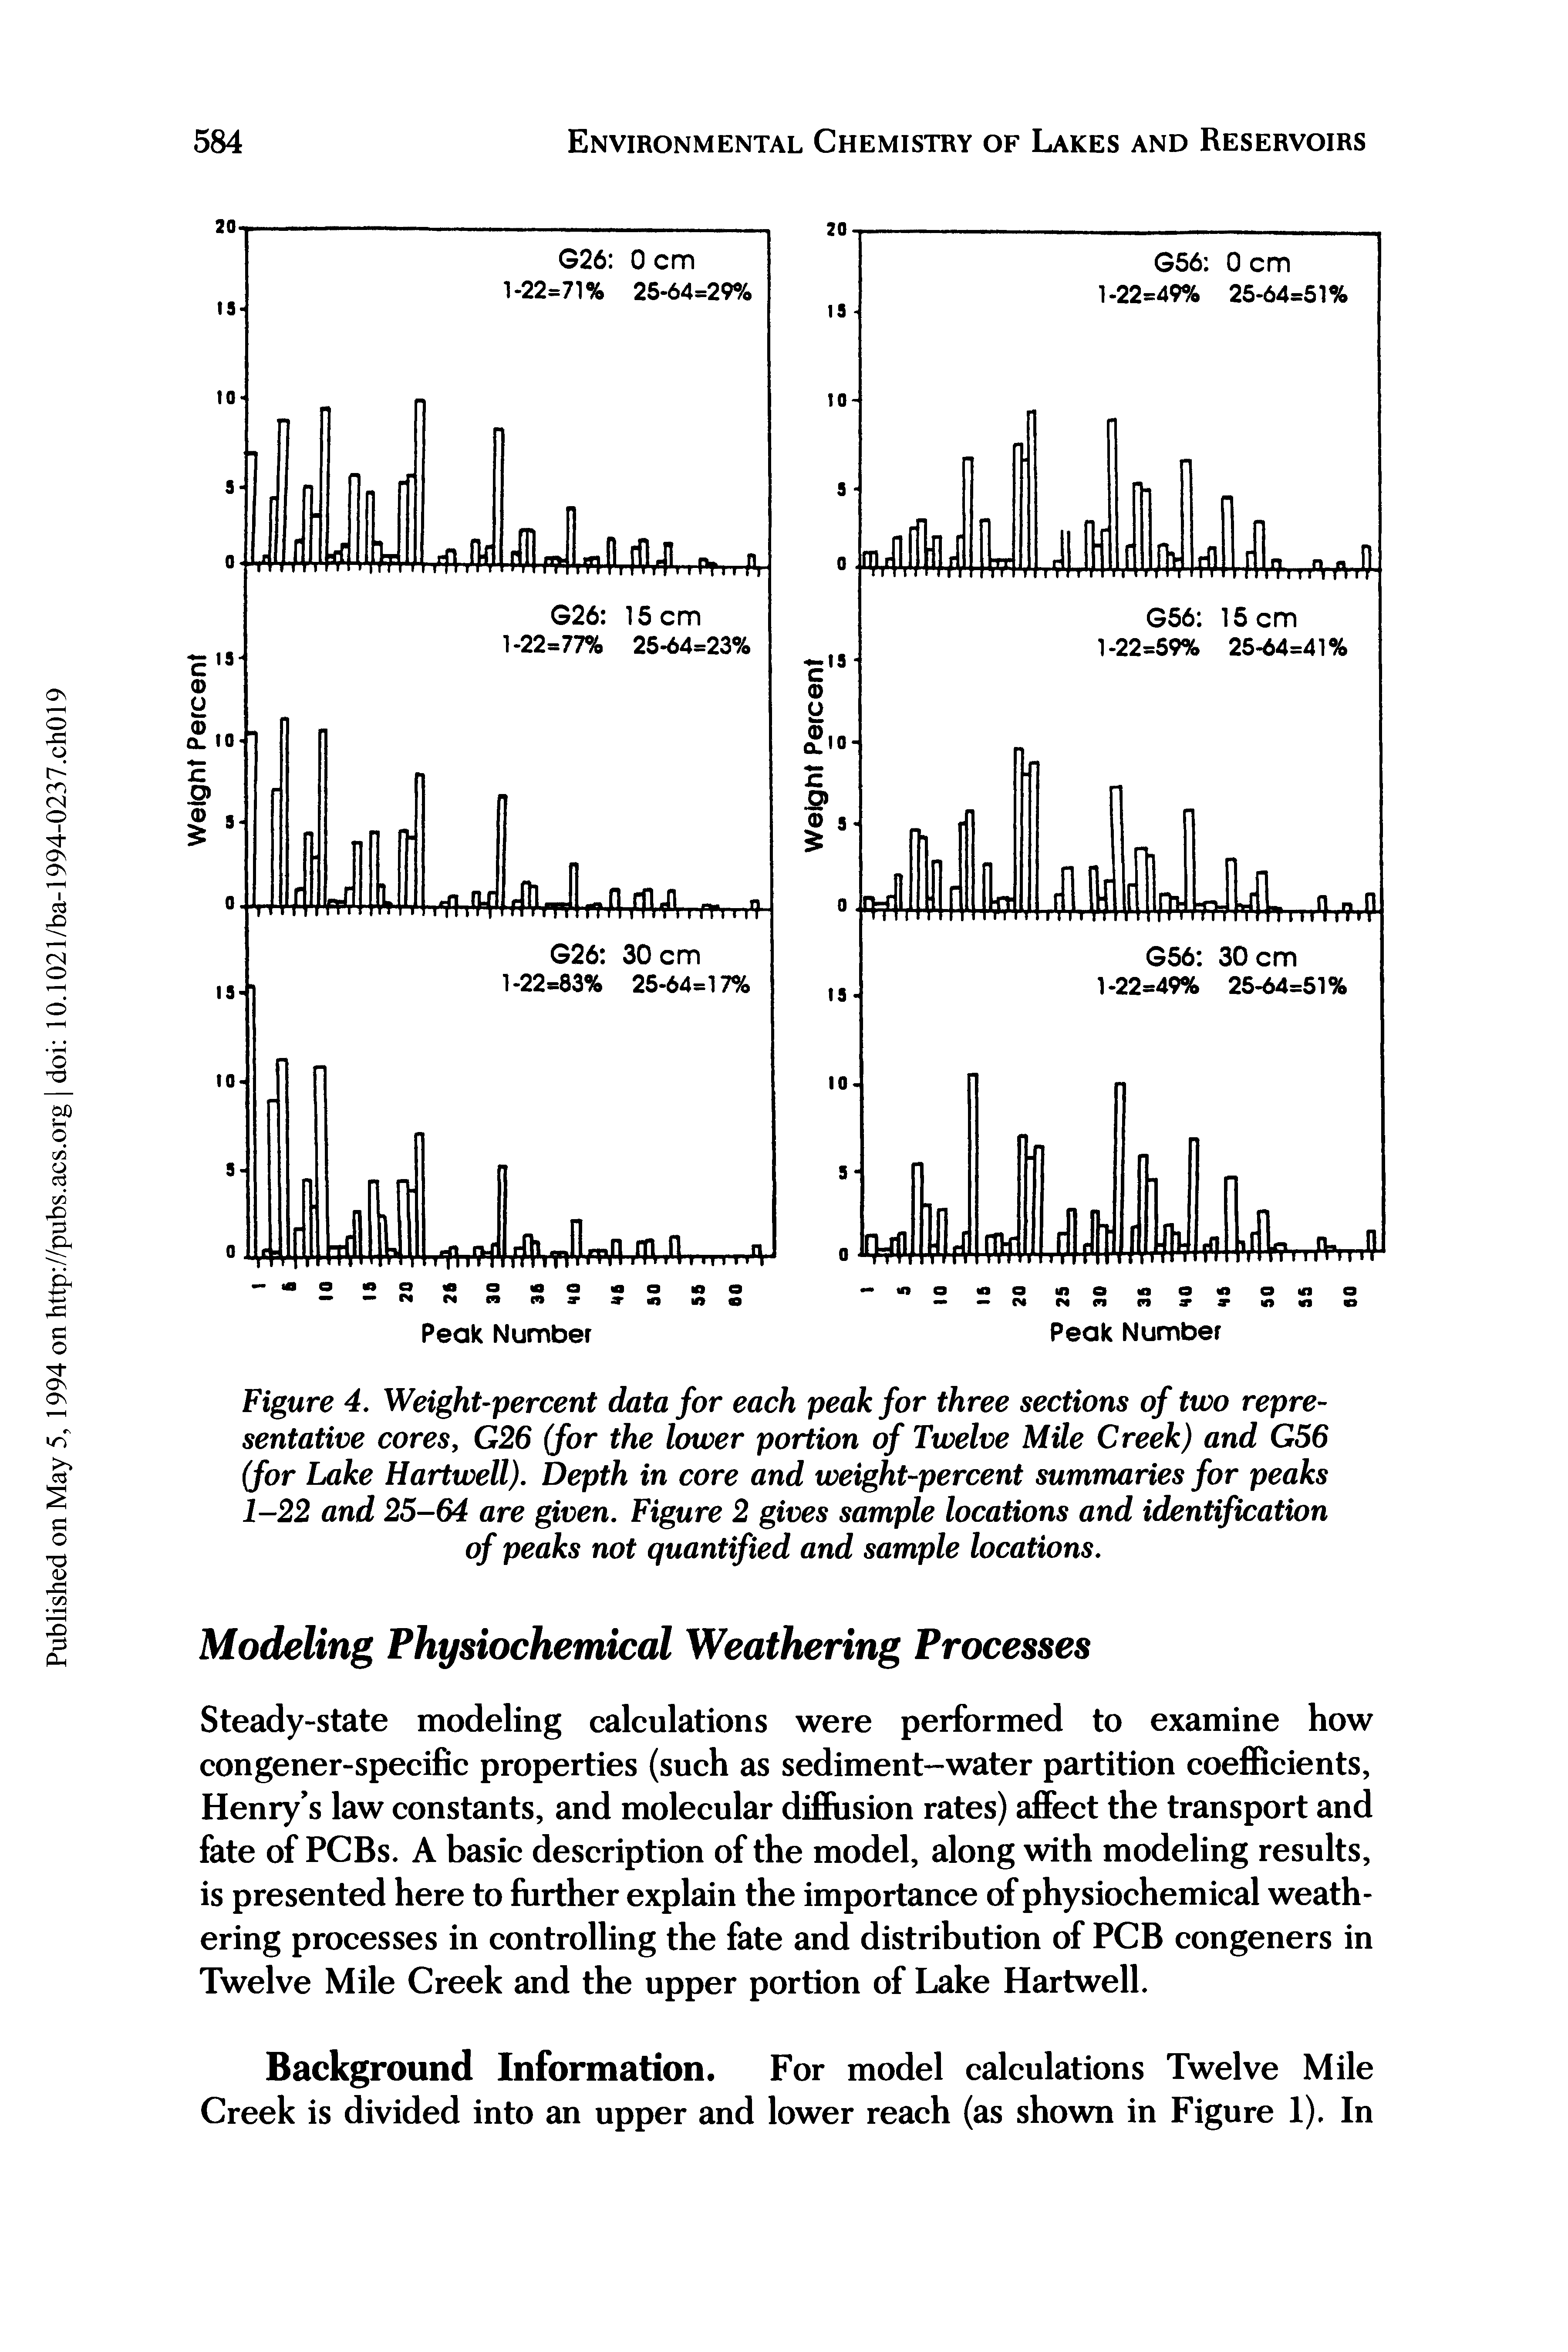 Figure 4. Weight-percent data for each peak for three sections of two representative cores, G26 (for the lower portion of Twelve Mile Creek) and G56 (for Lake Hartwell). Depth in core and weight-percent summaries for peaks 1-22 and 25-64 are given. Figure 2 gives sample locations and identification of peaks not quantified and sample locations.